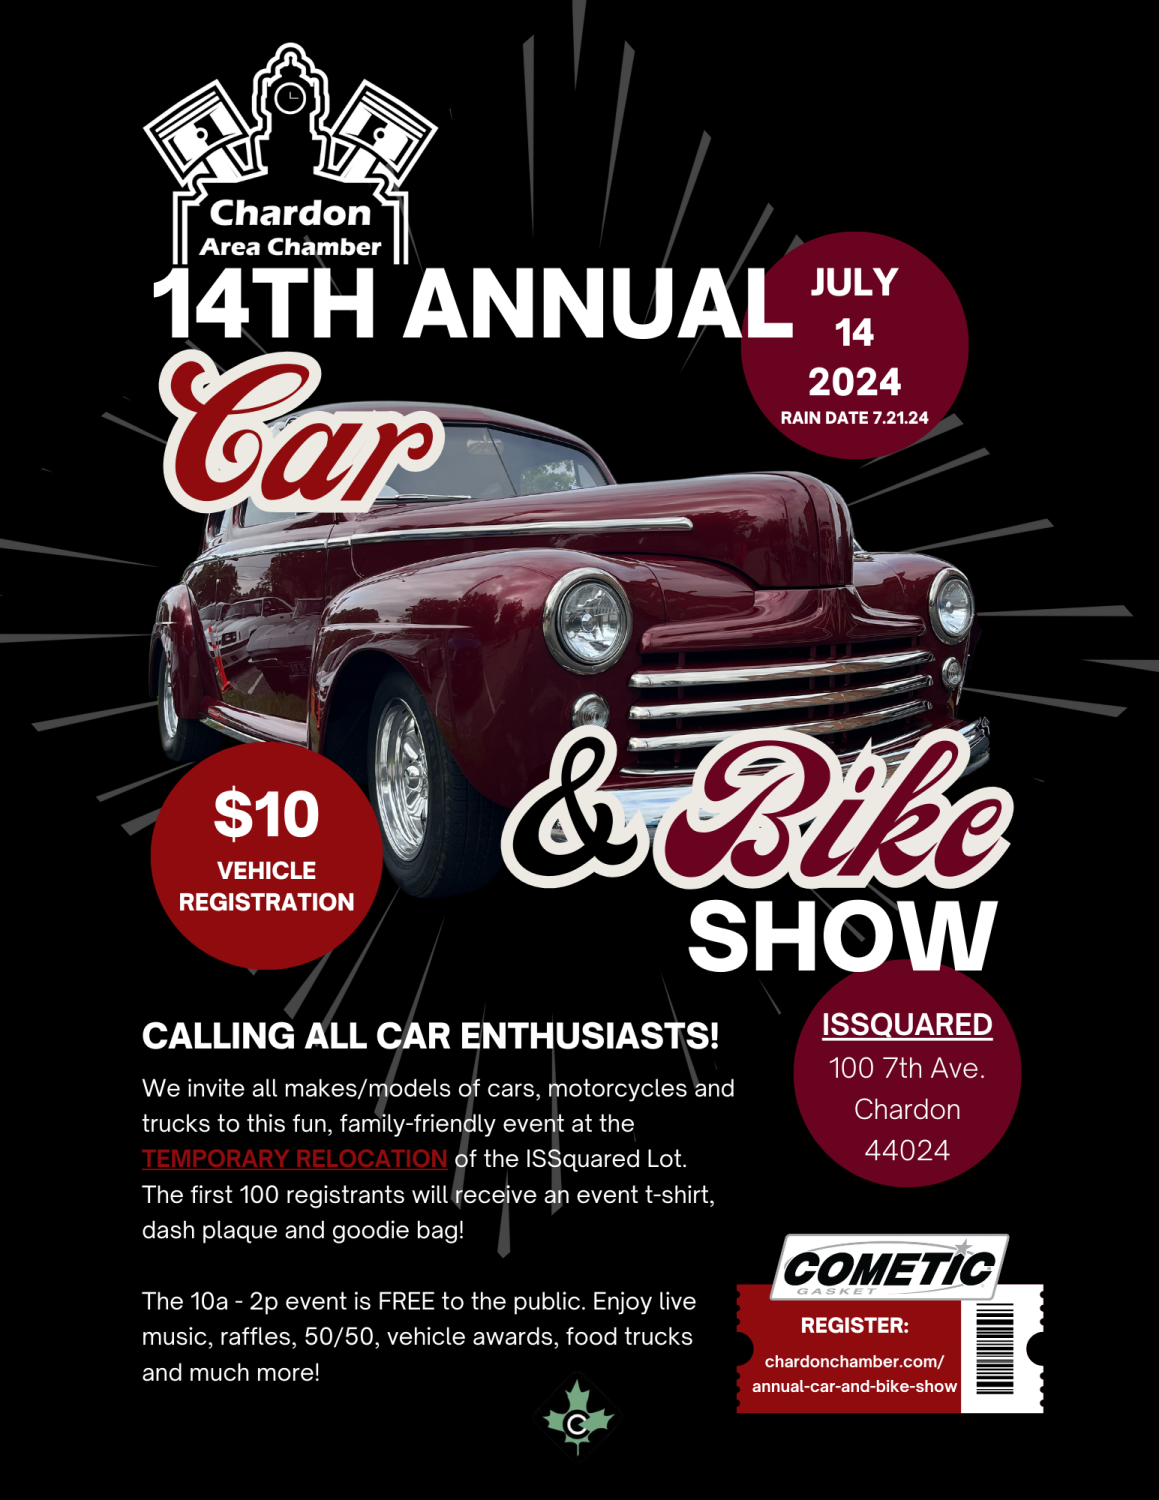 Chardon Area Chamber of Commerce's 14th Annual Car & Bike Show